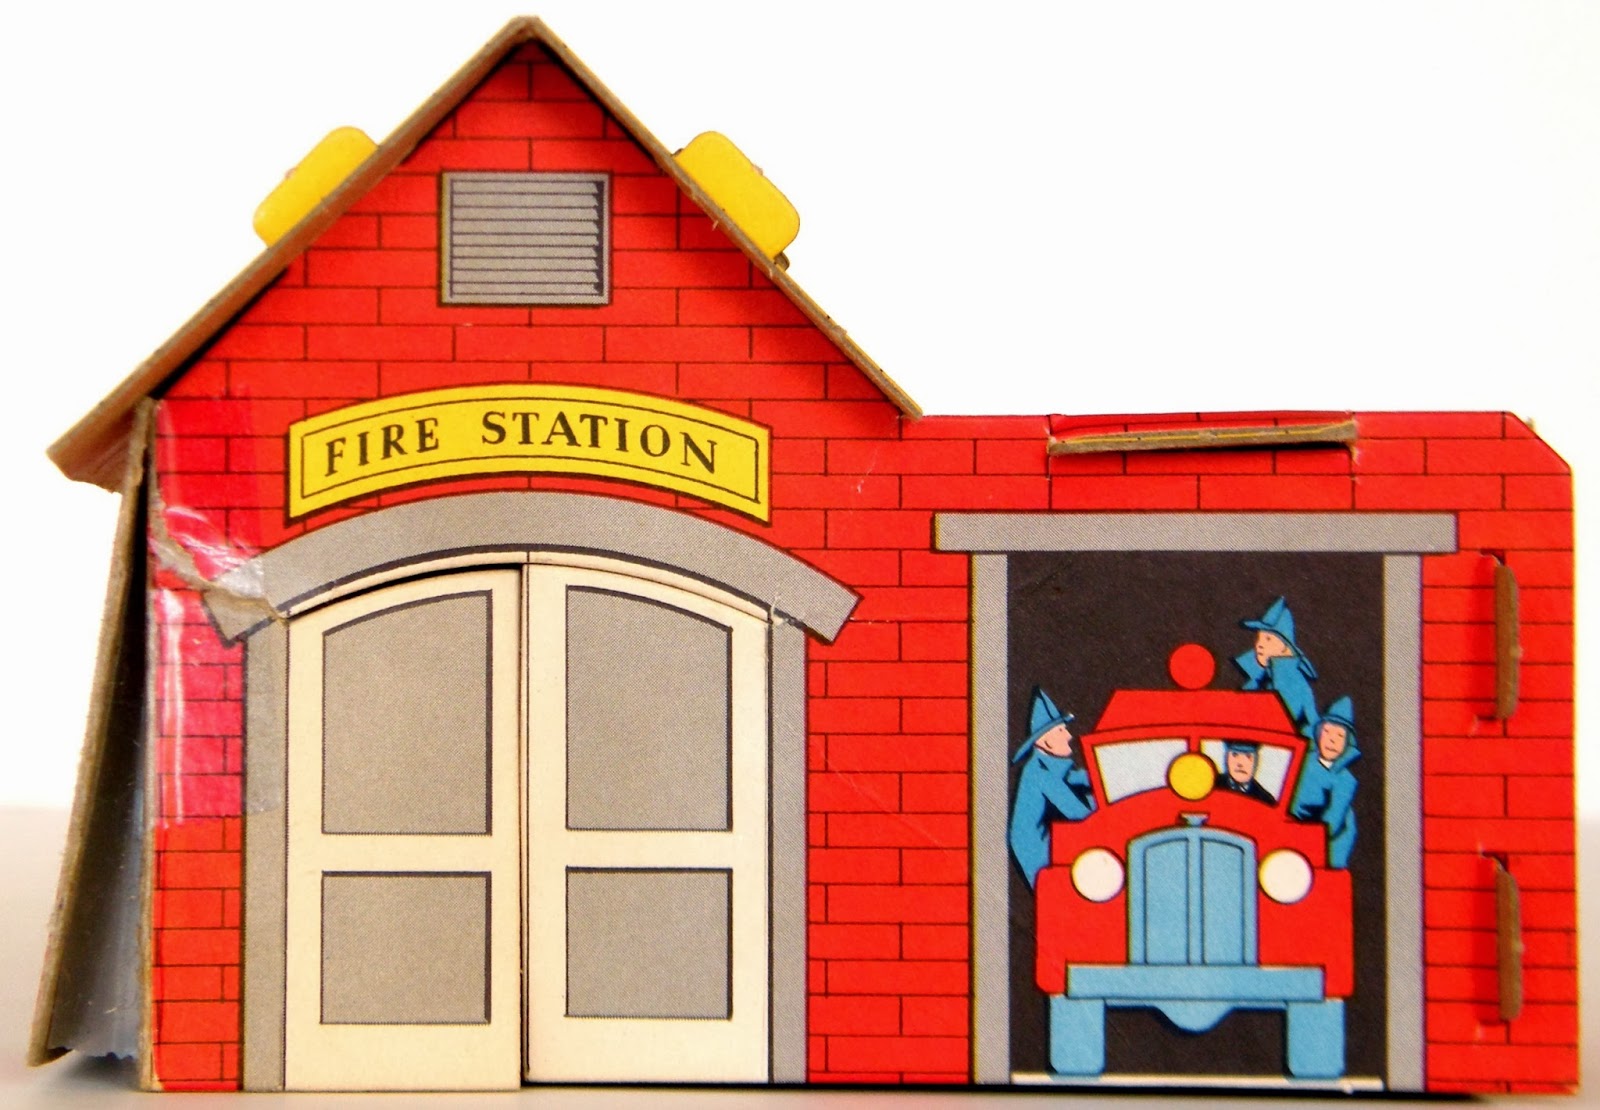 Fire Station Building Clipart.